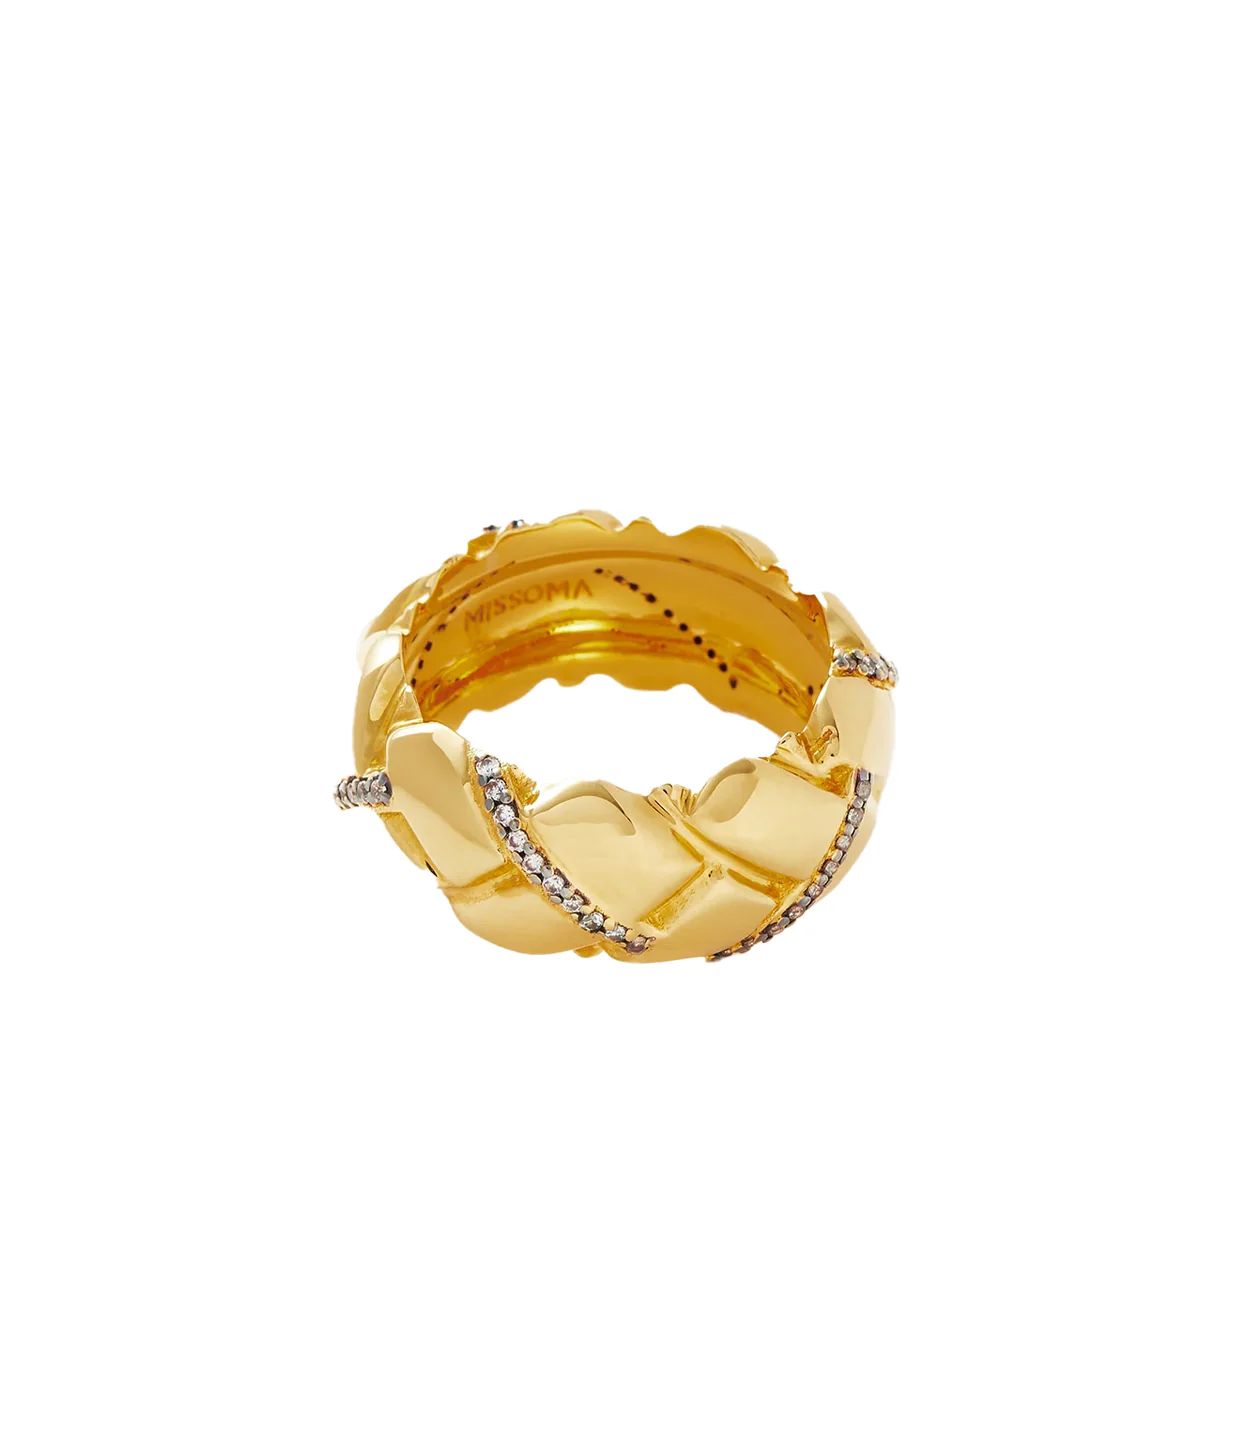 Lucy Williams X Missoma Chunky Pave Waffle Ring in Gold | Mode Sportif